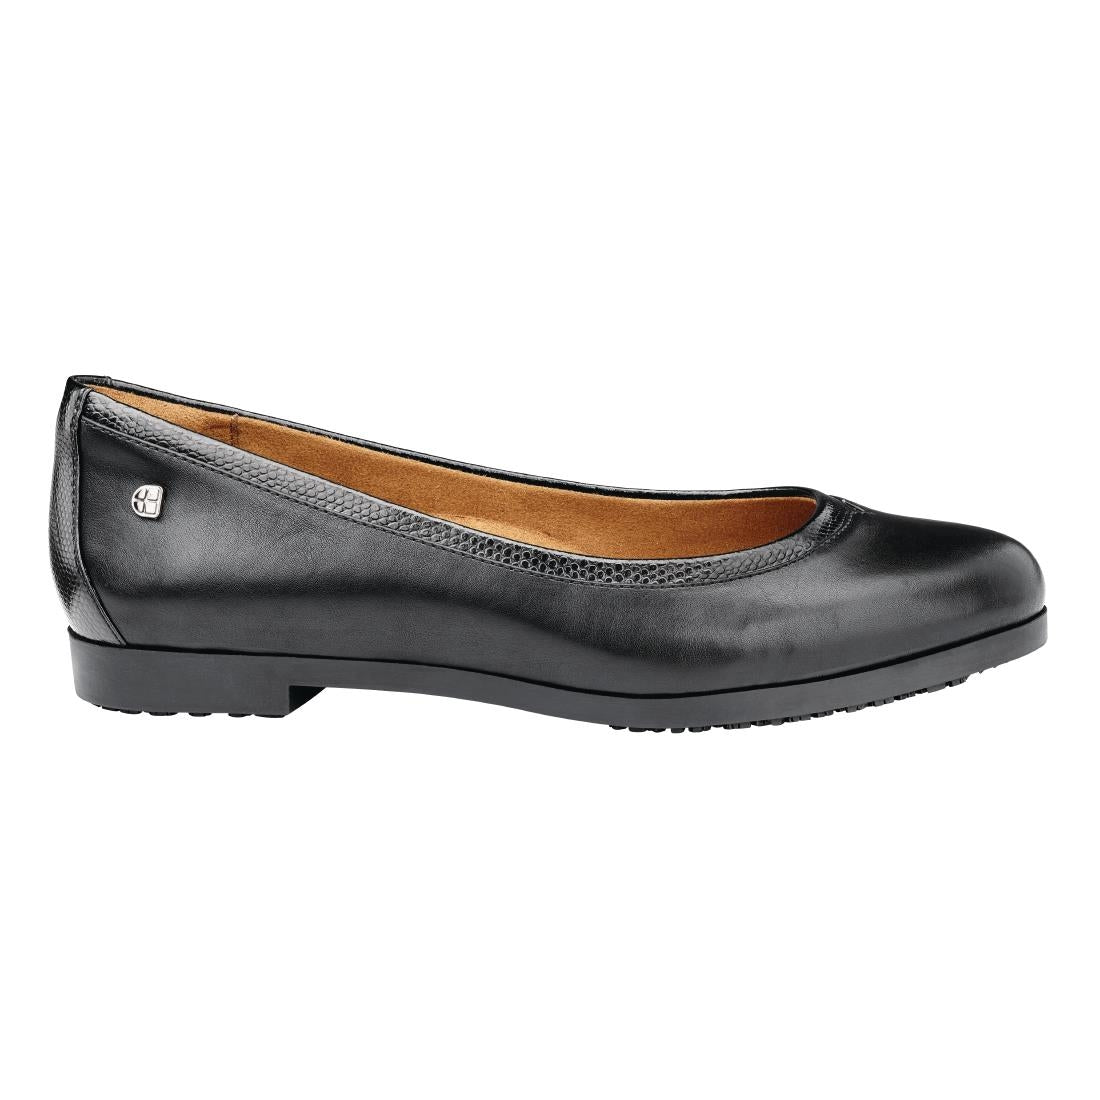 BB594-36 Shoes for Crews Womens Reese Slip On Shoes Black Size 36 JD Catering Equipment Solutions Ltd